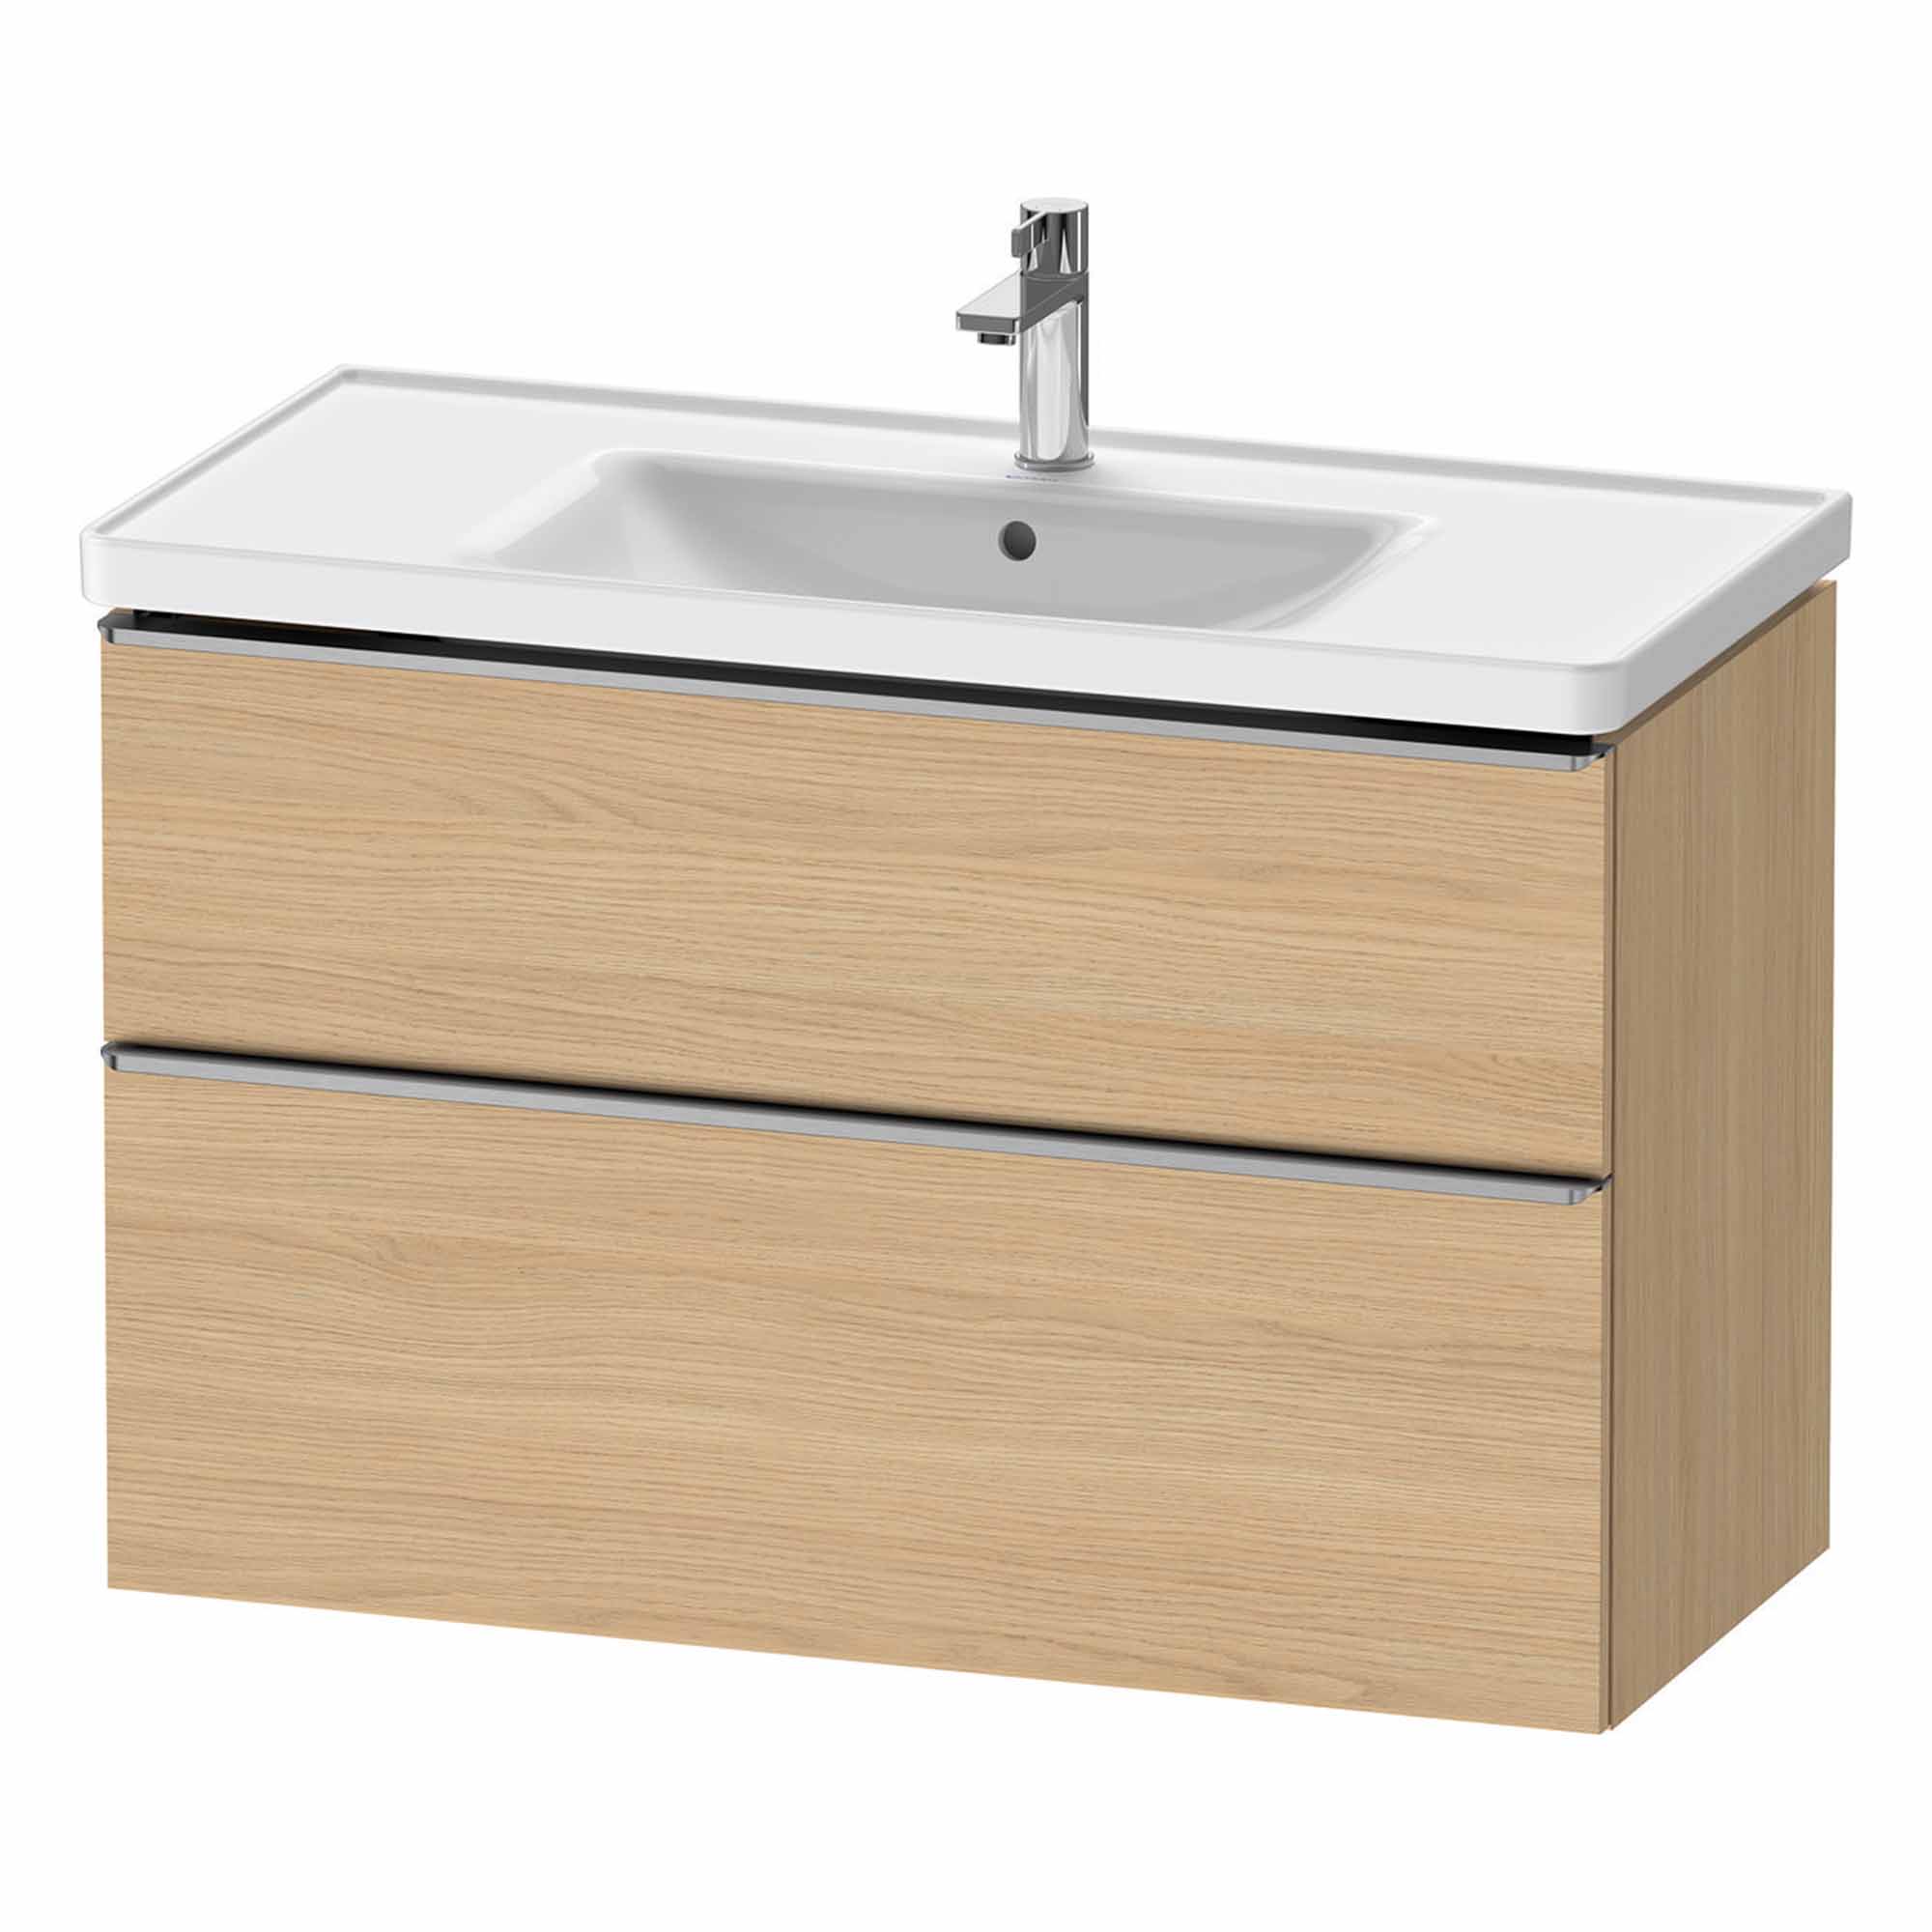 duravit d-neo 1000mm wall mounted vanity unit with d-neo basin natural oak stainless steel handles